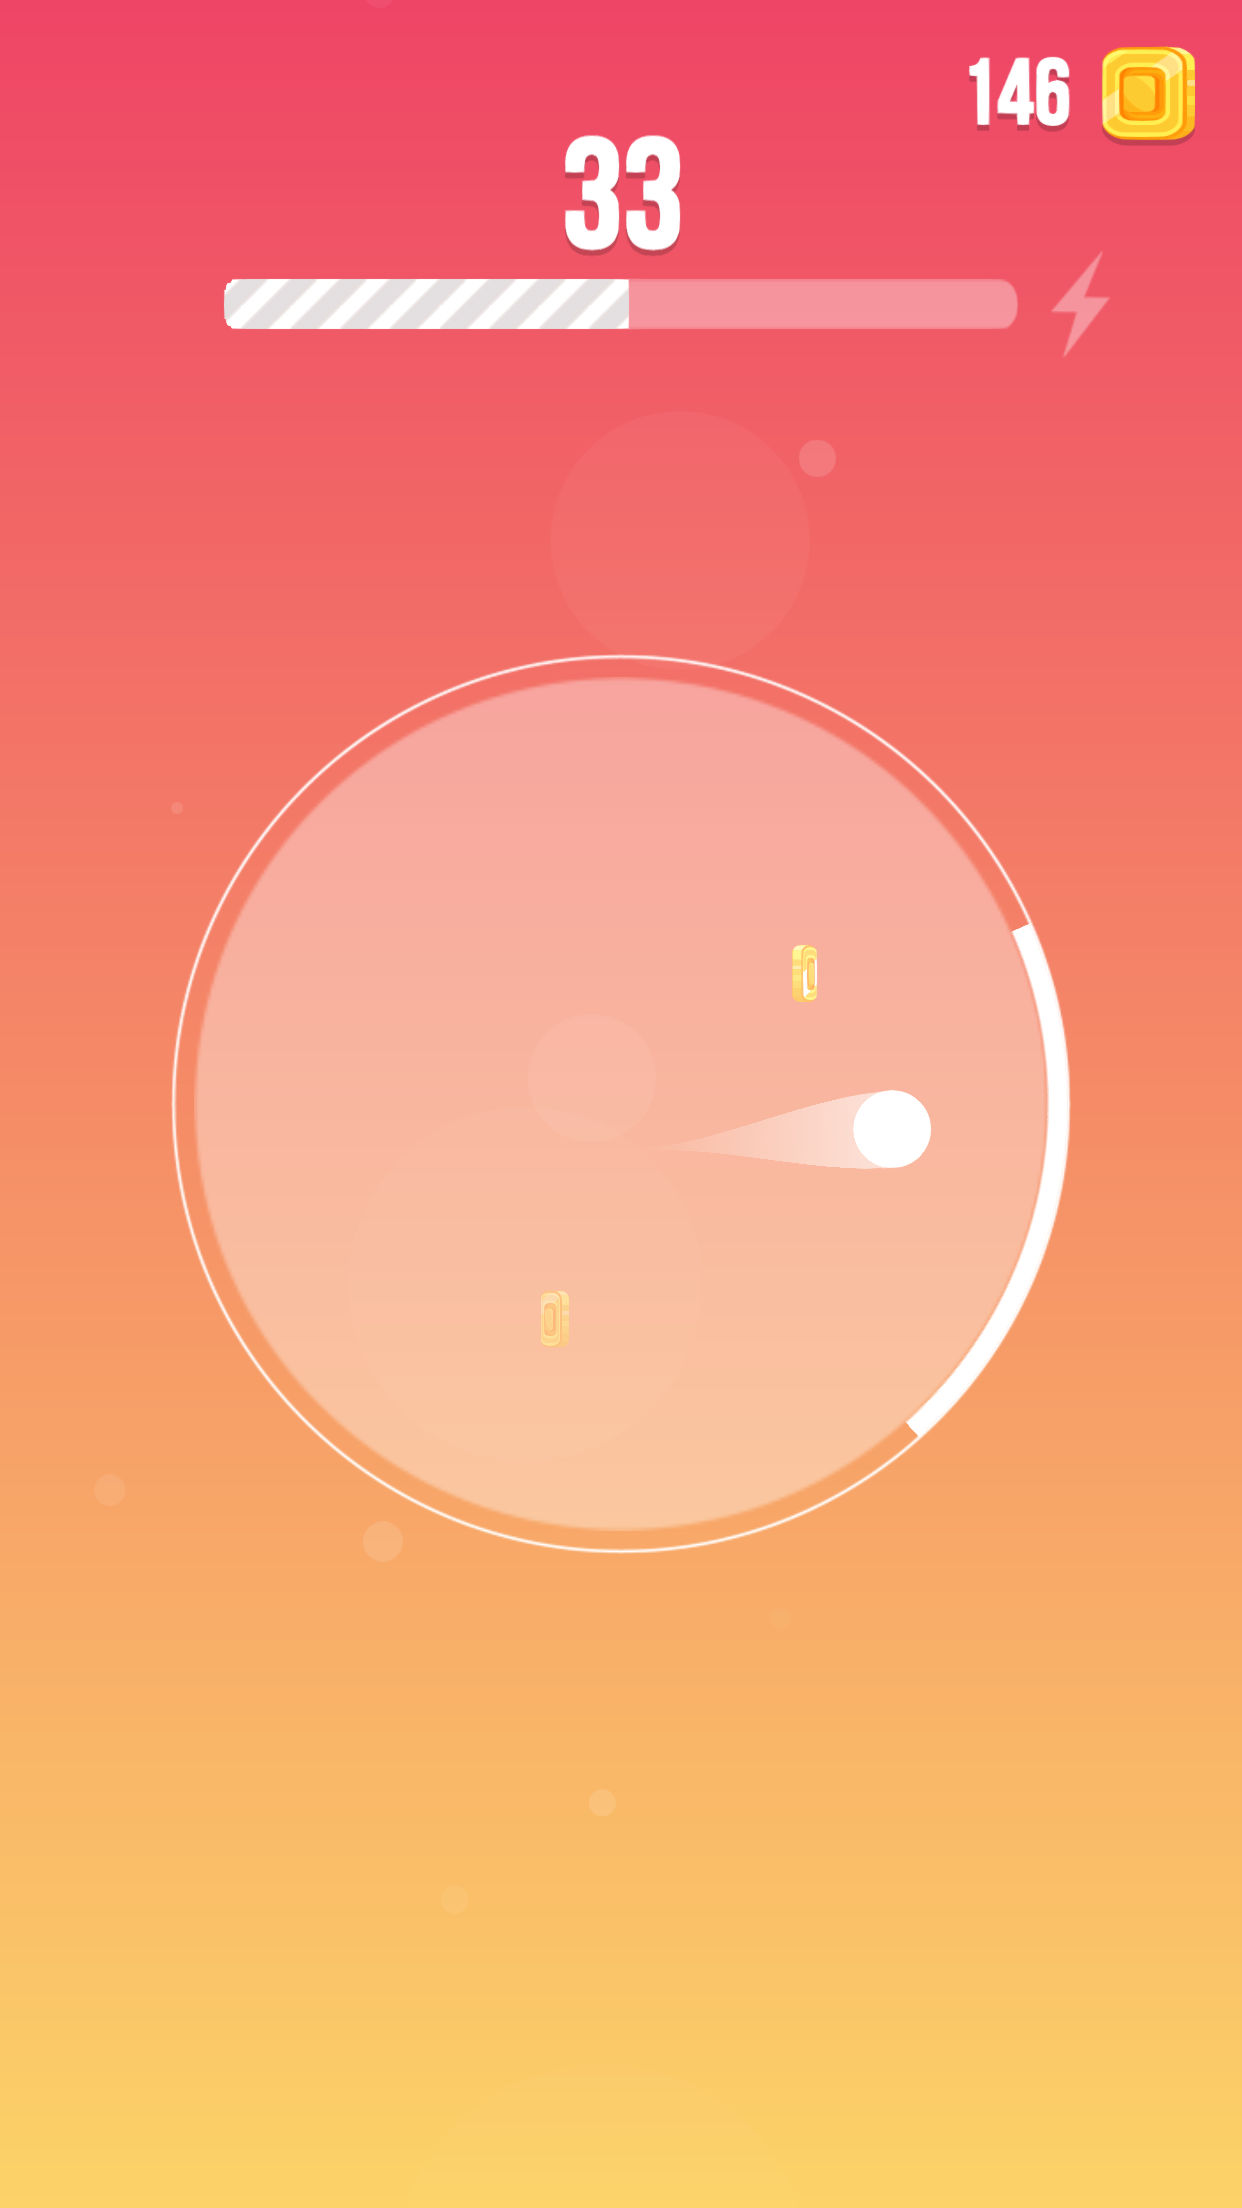 Crazy Ball Game Apple AppStore - Google Play Store Image 1